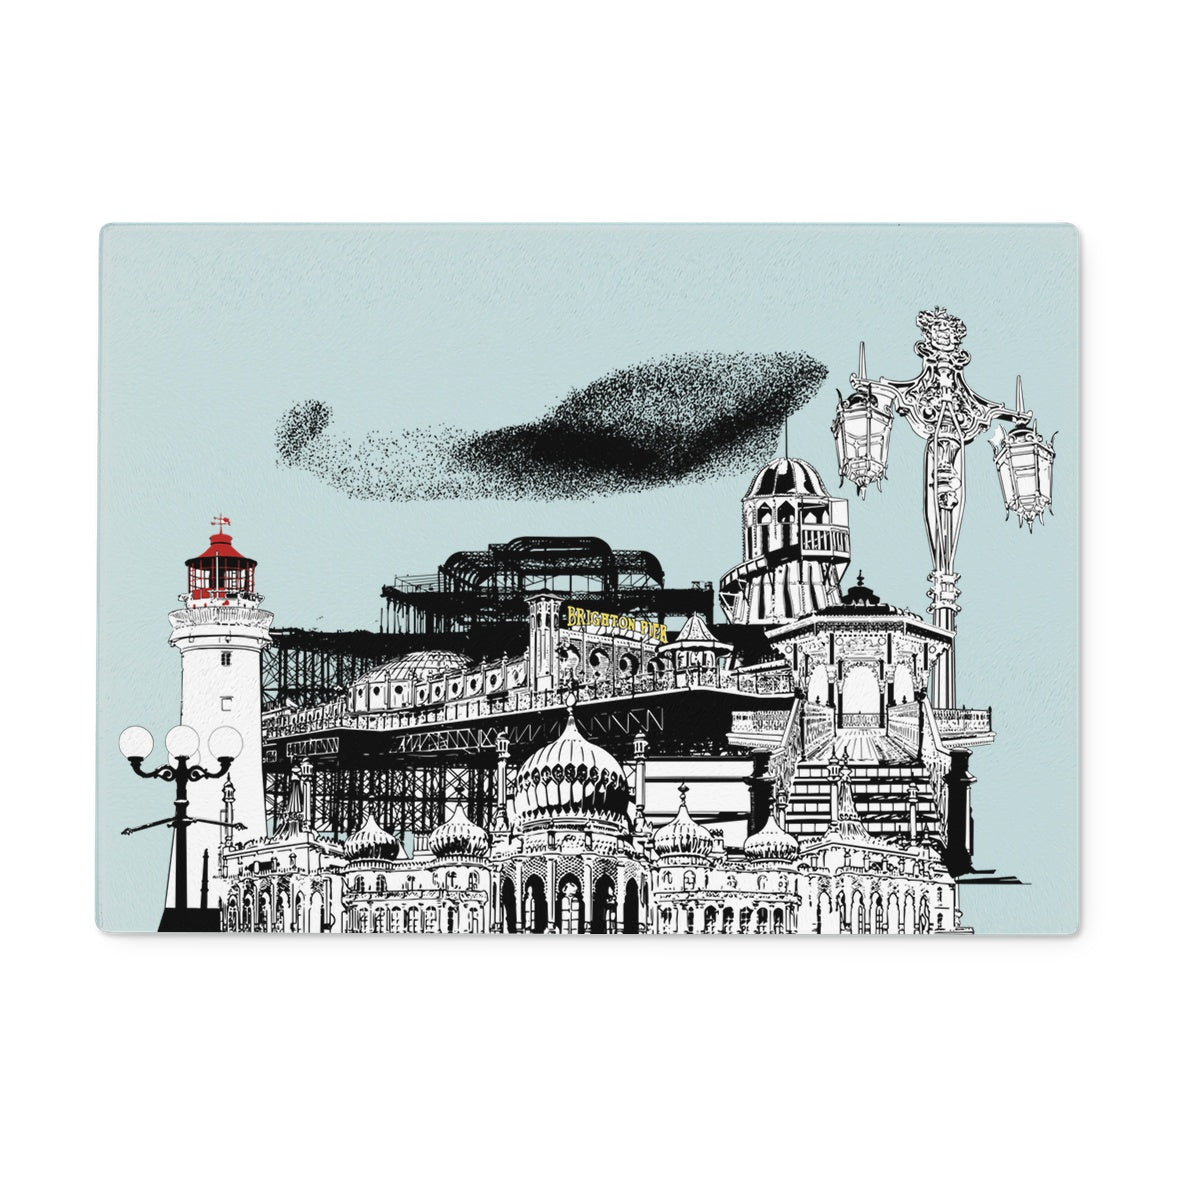 Decorative Coasters Featuring Brightons Landmarks by Powder Butterfly